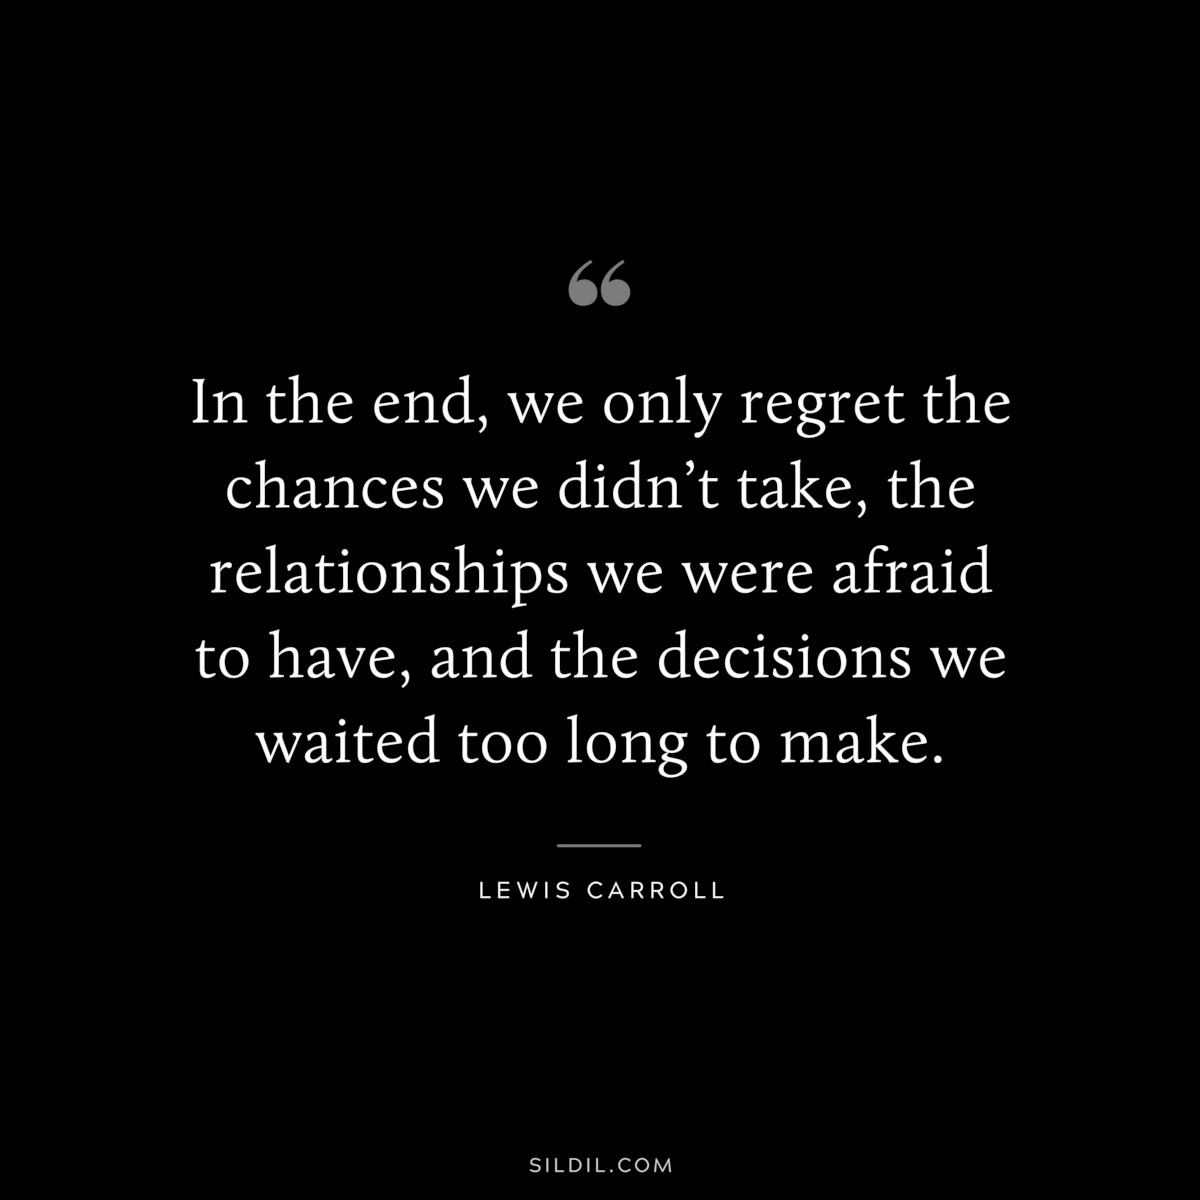 In the end, we only regret the chances we didn’t take, the relationships we were afraid to have, and the decisions we waited too long to make.